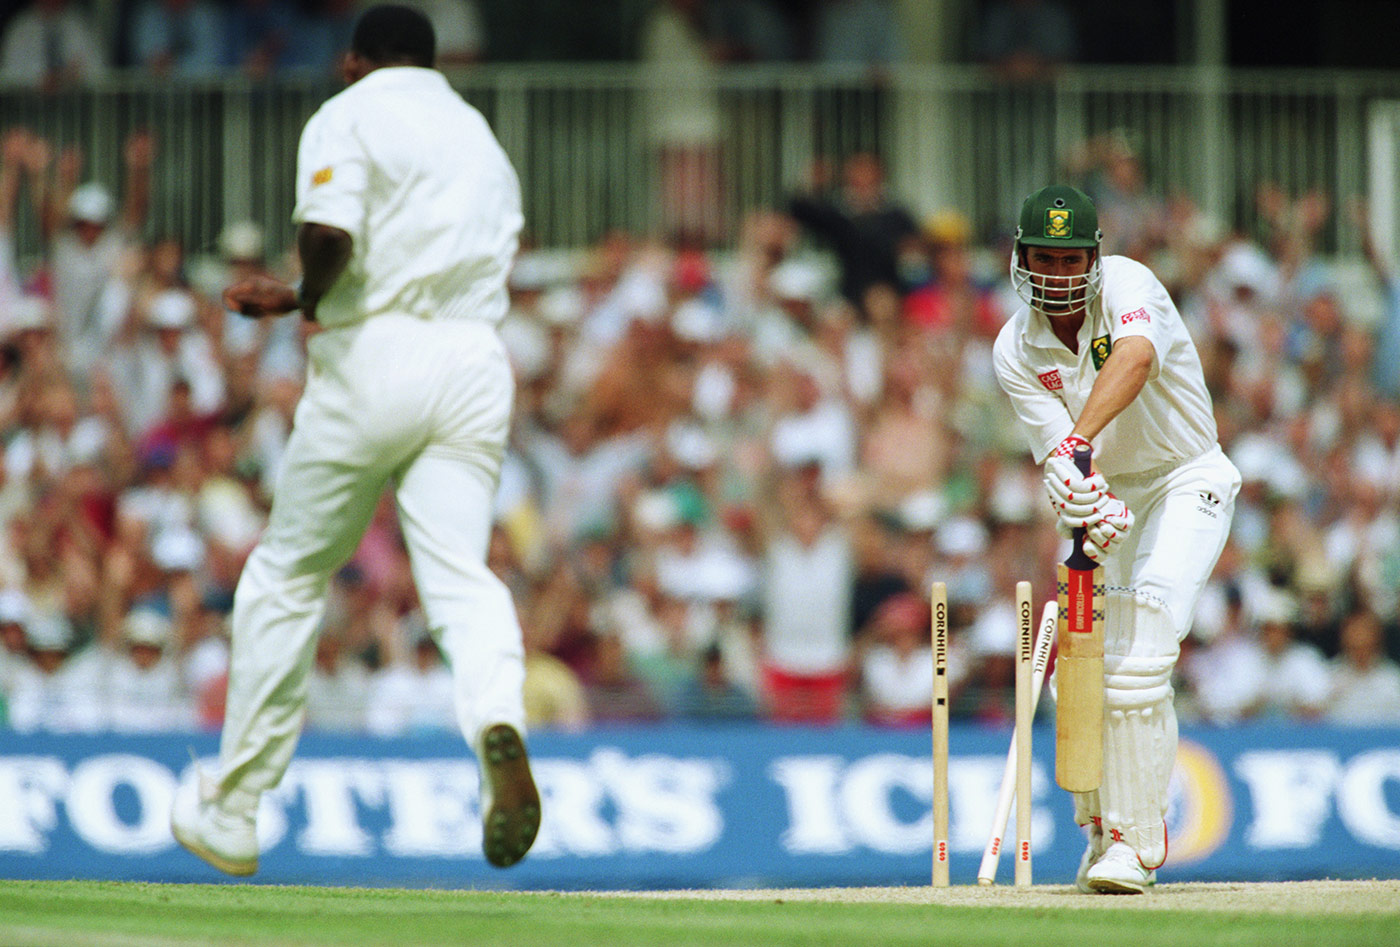 Devon Malcolm is among the Windrush generation to have represented England at cricket ©Getty Images